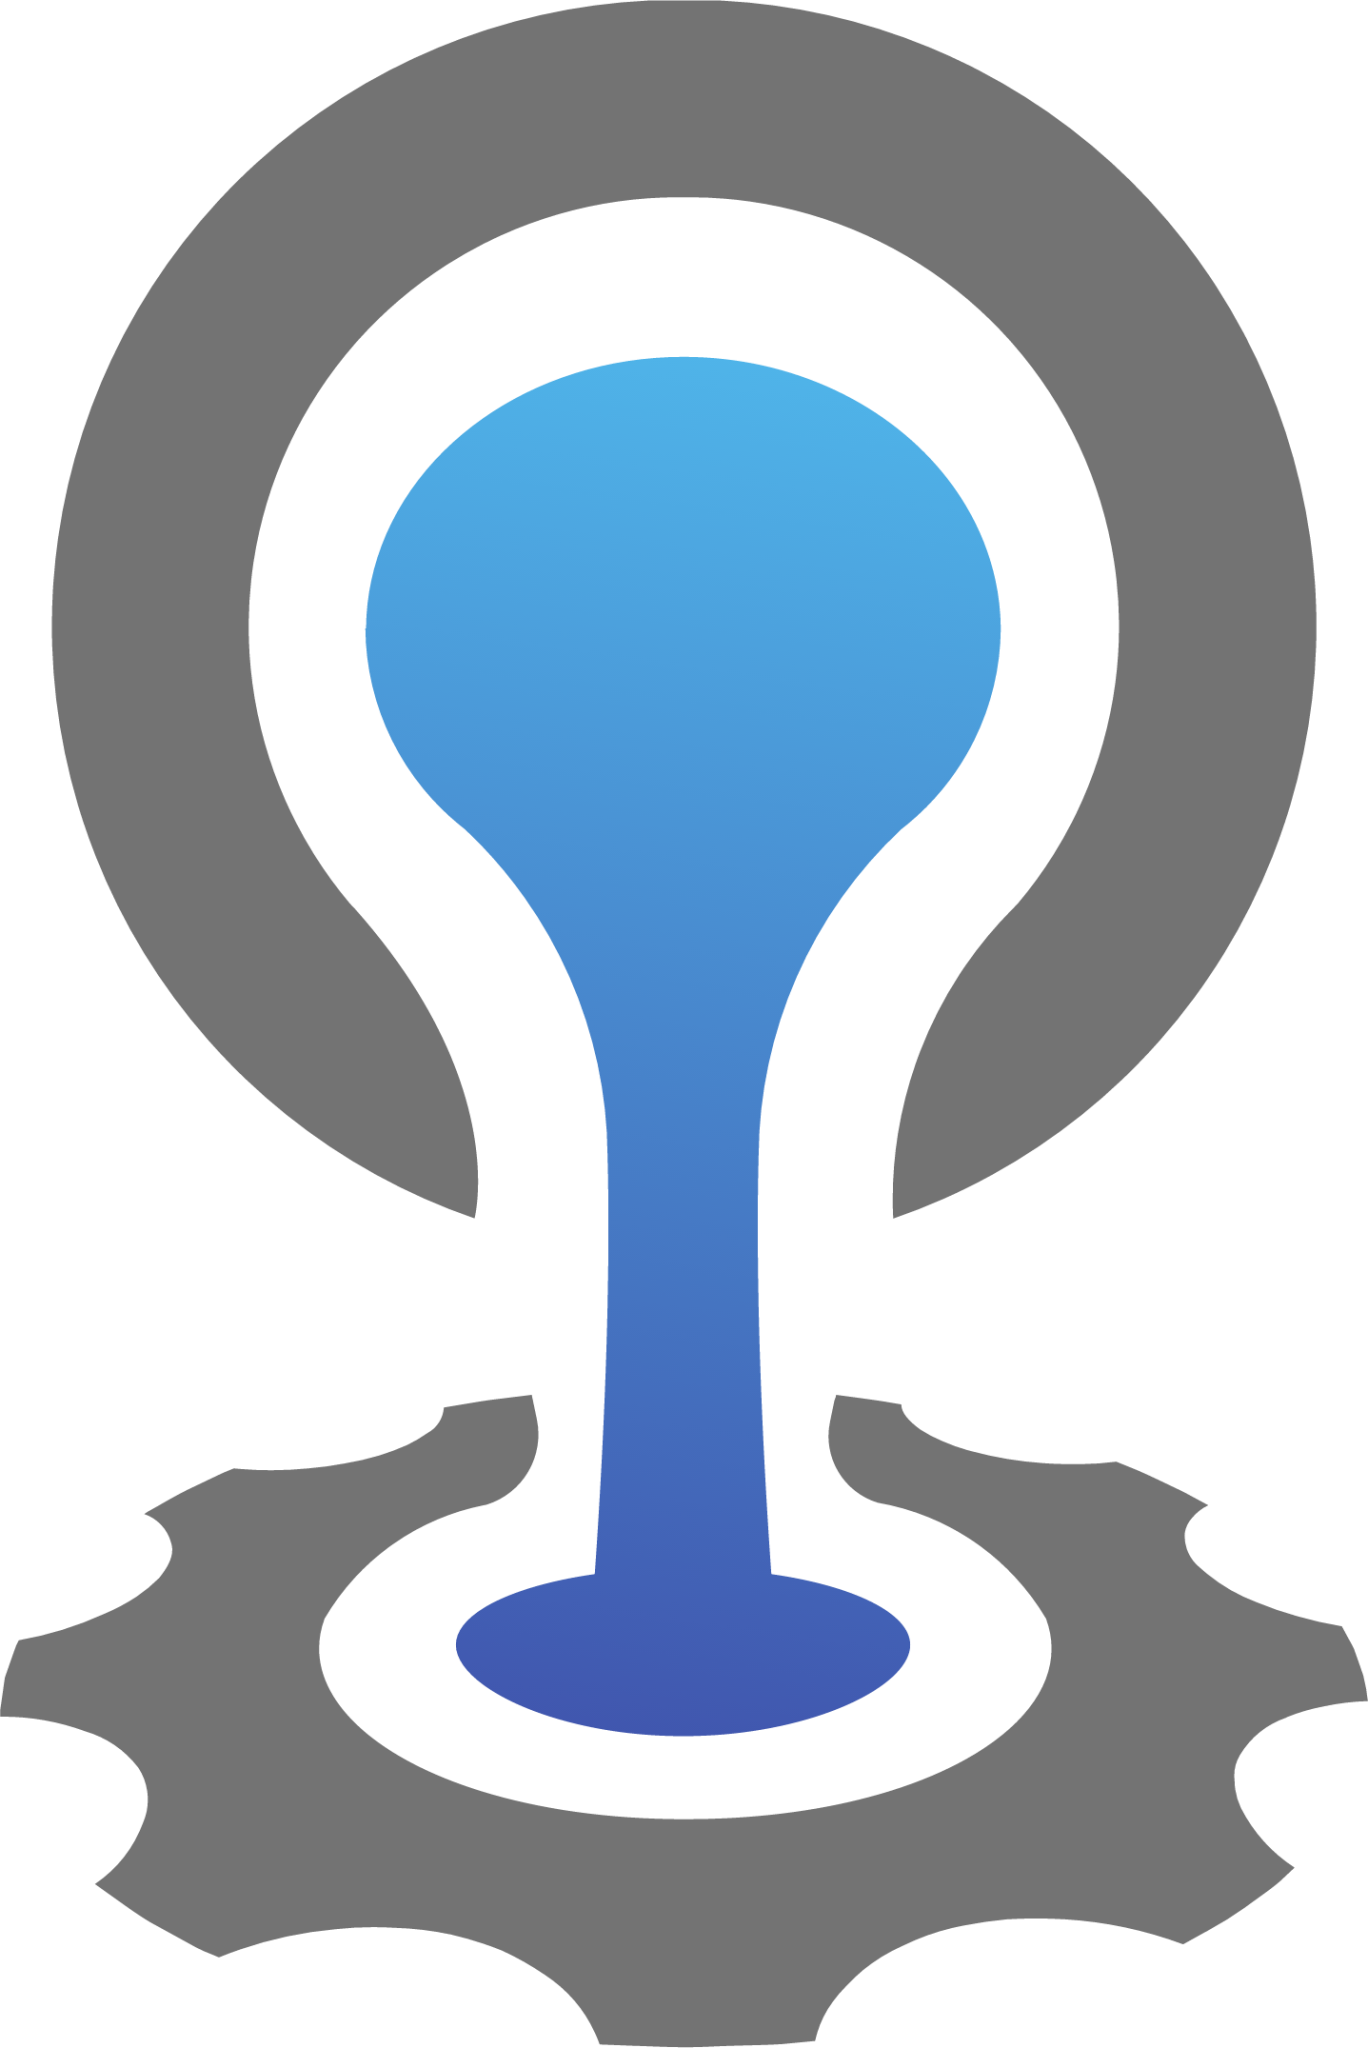 file type cloudfoundry icon